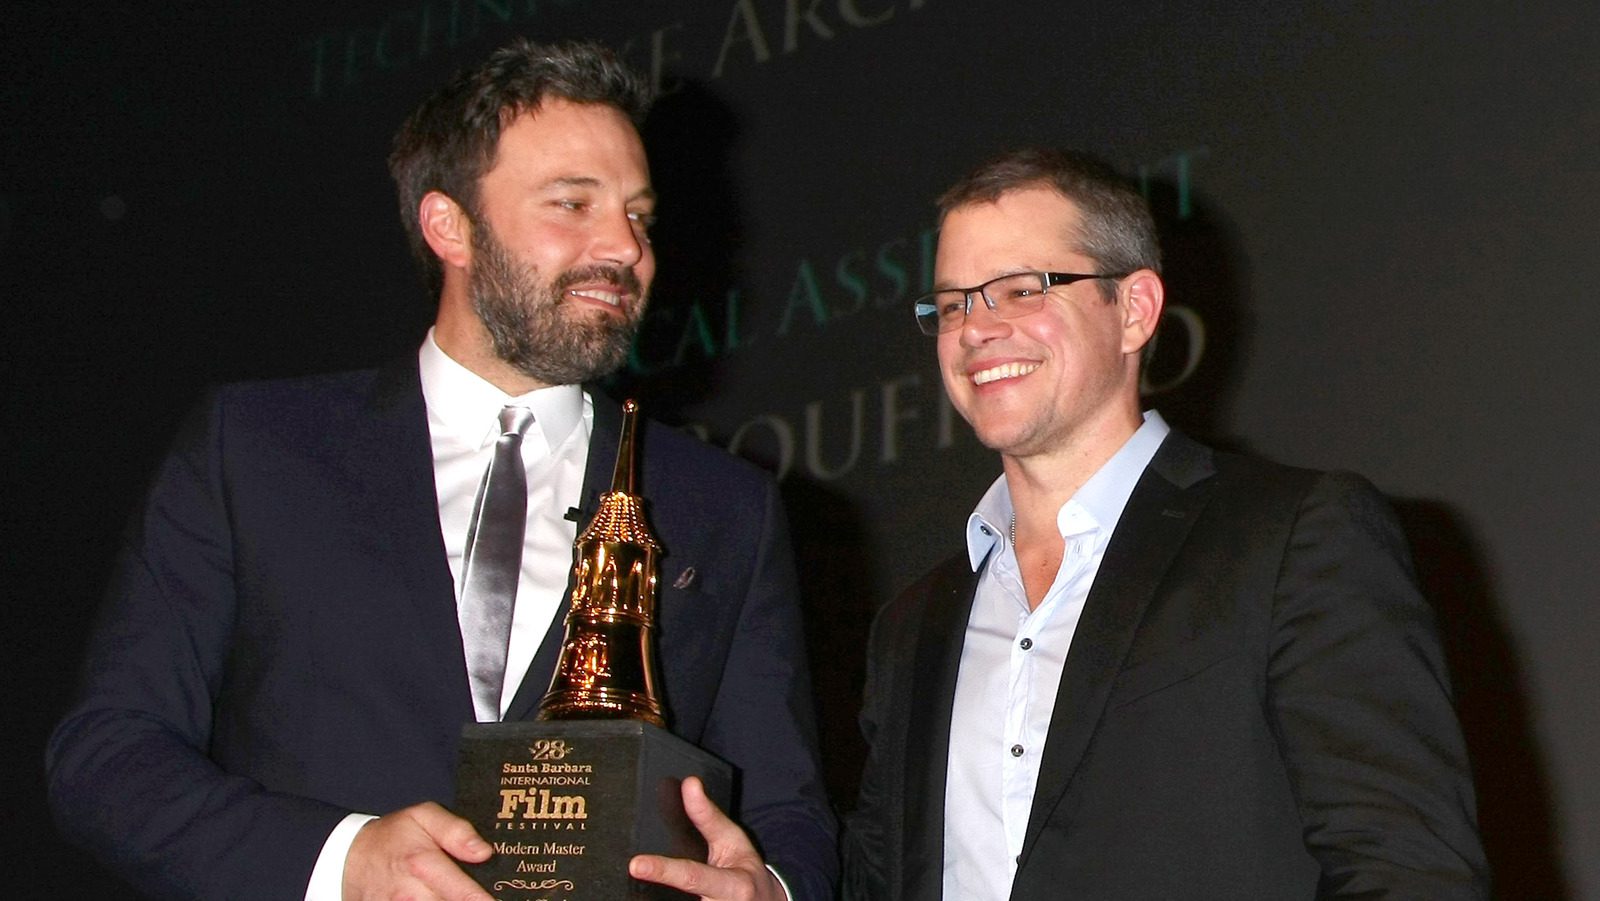 Ben Affleck And Matt Damon's Nike Movie Gets A Super Bowl Ad And A Surprising Theatrical Run